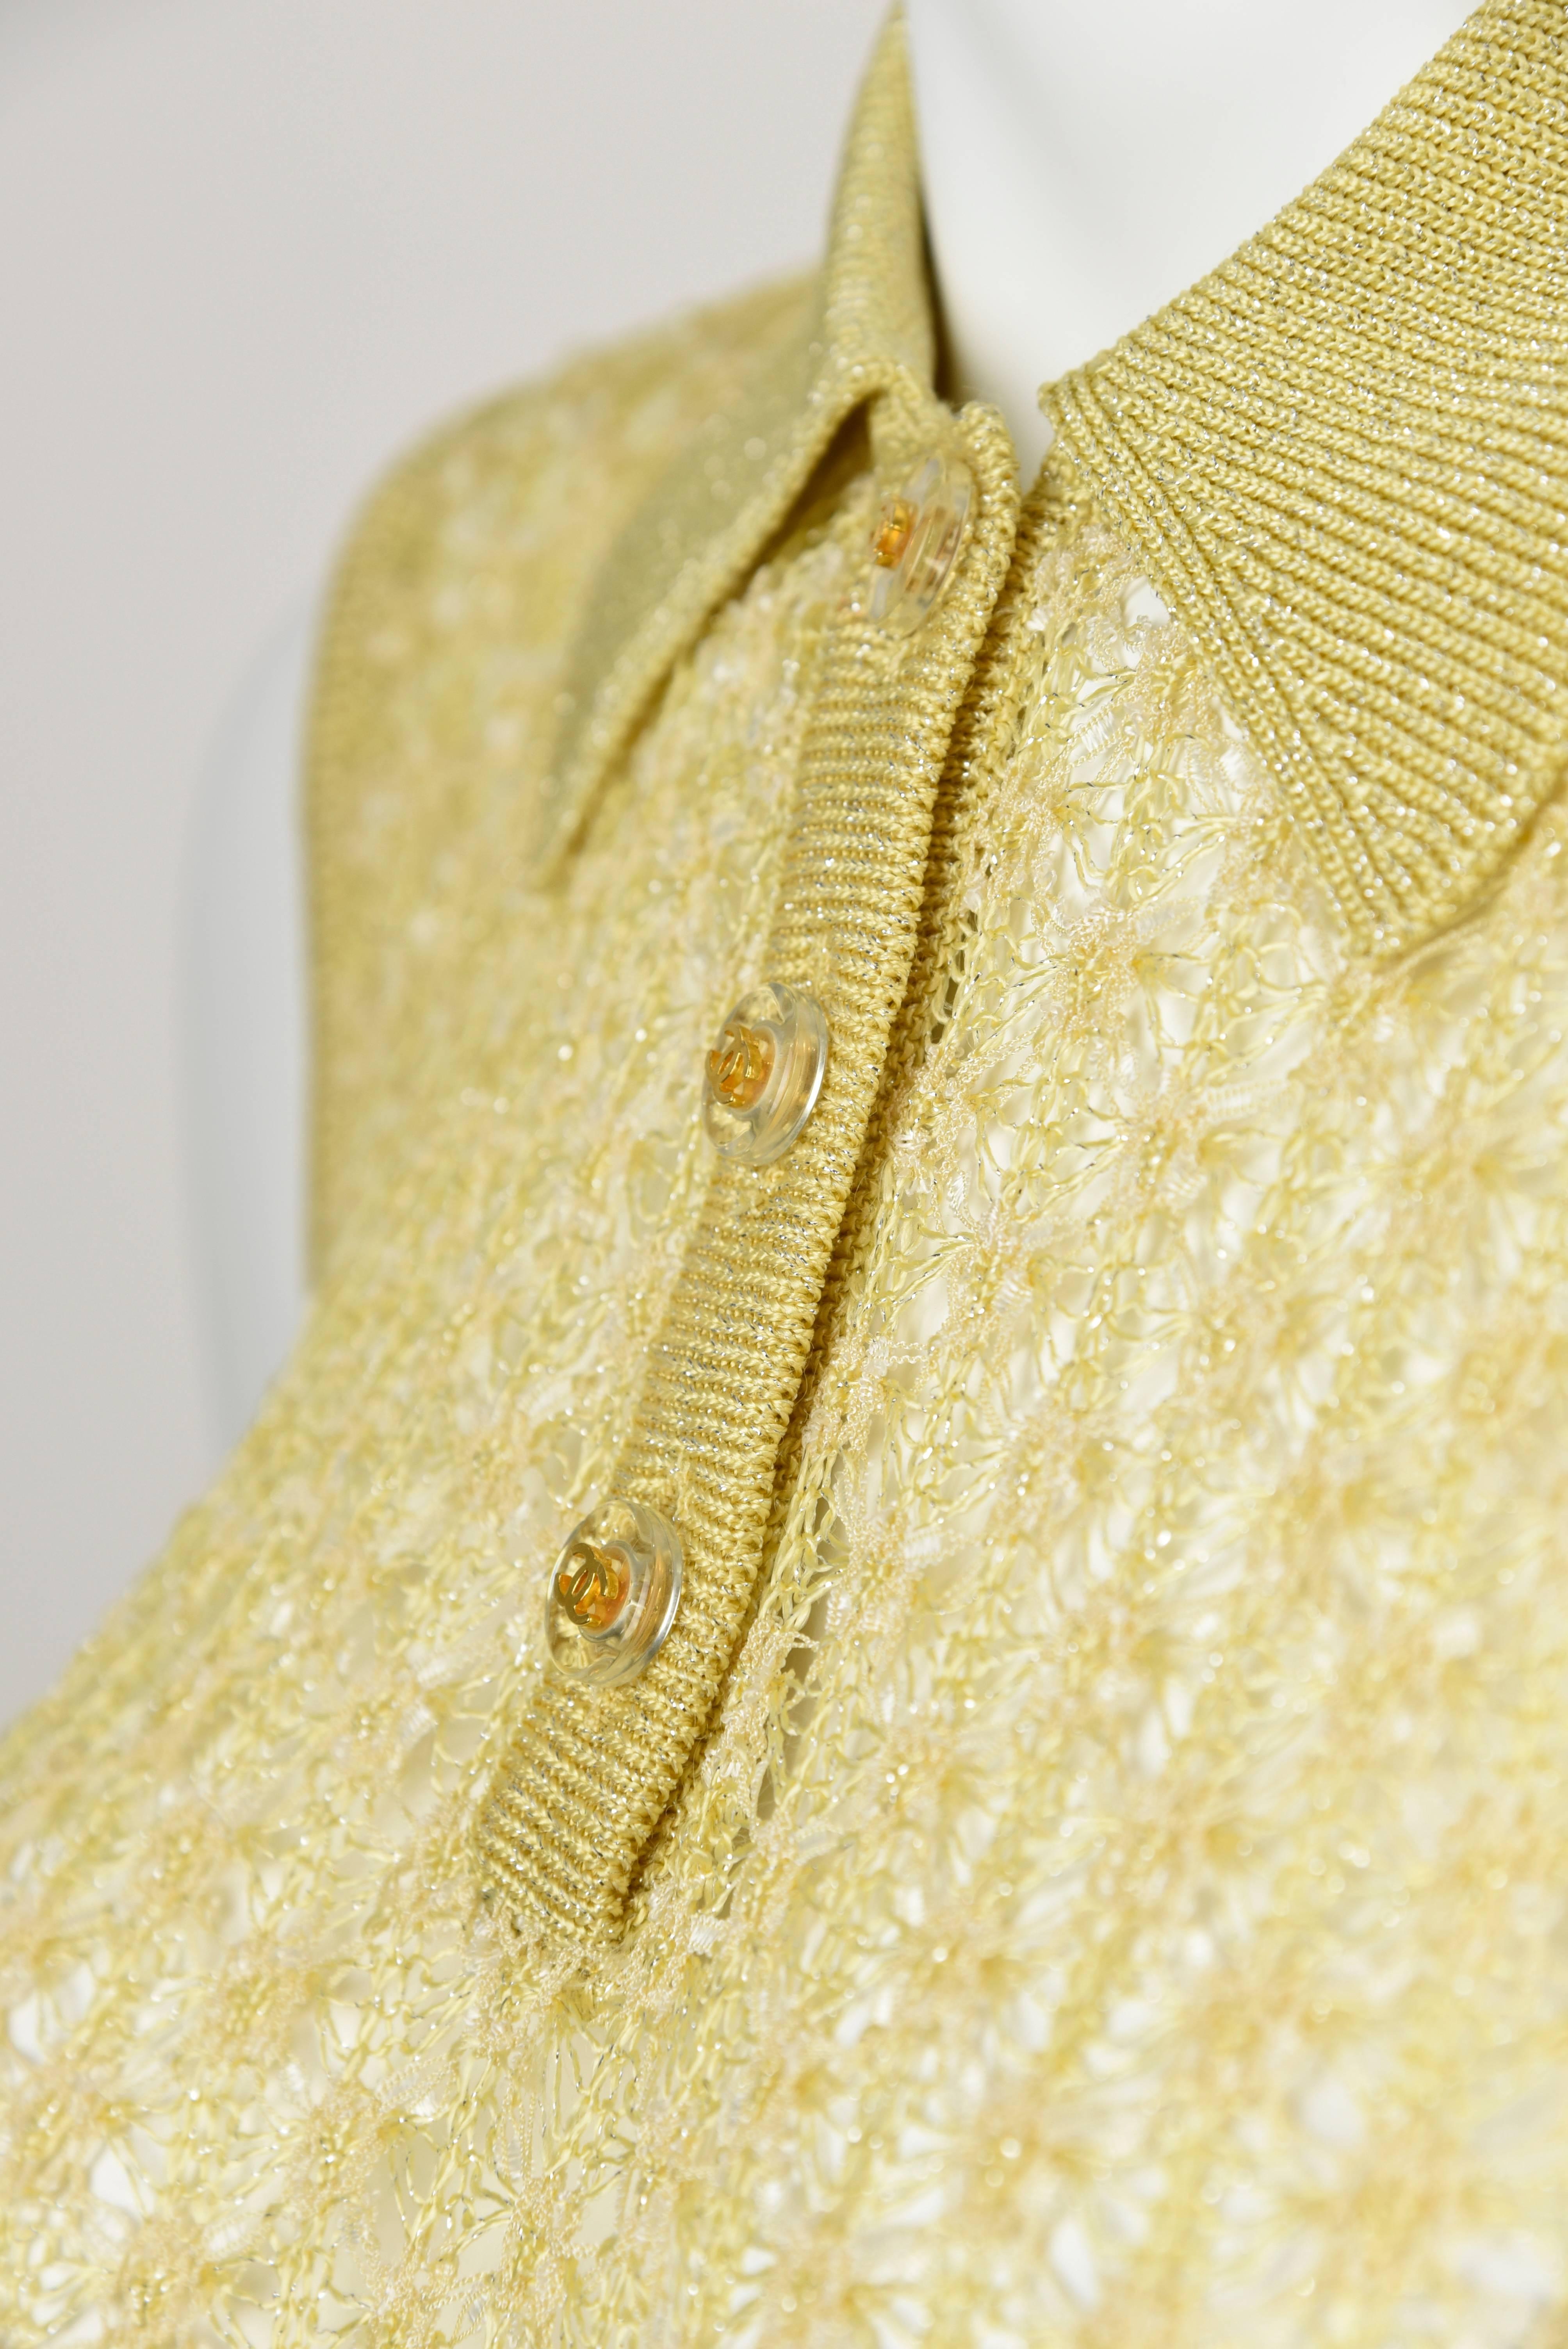 Beige Chanel Boutique 1997P Gold/Metallic Crochet Sleeveless Top with Clear Buttons 42 For Sale